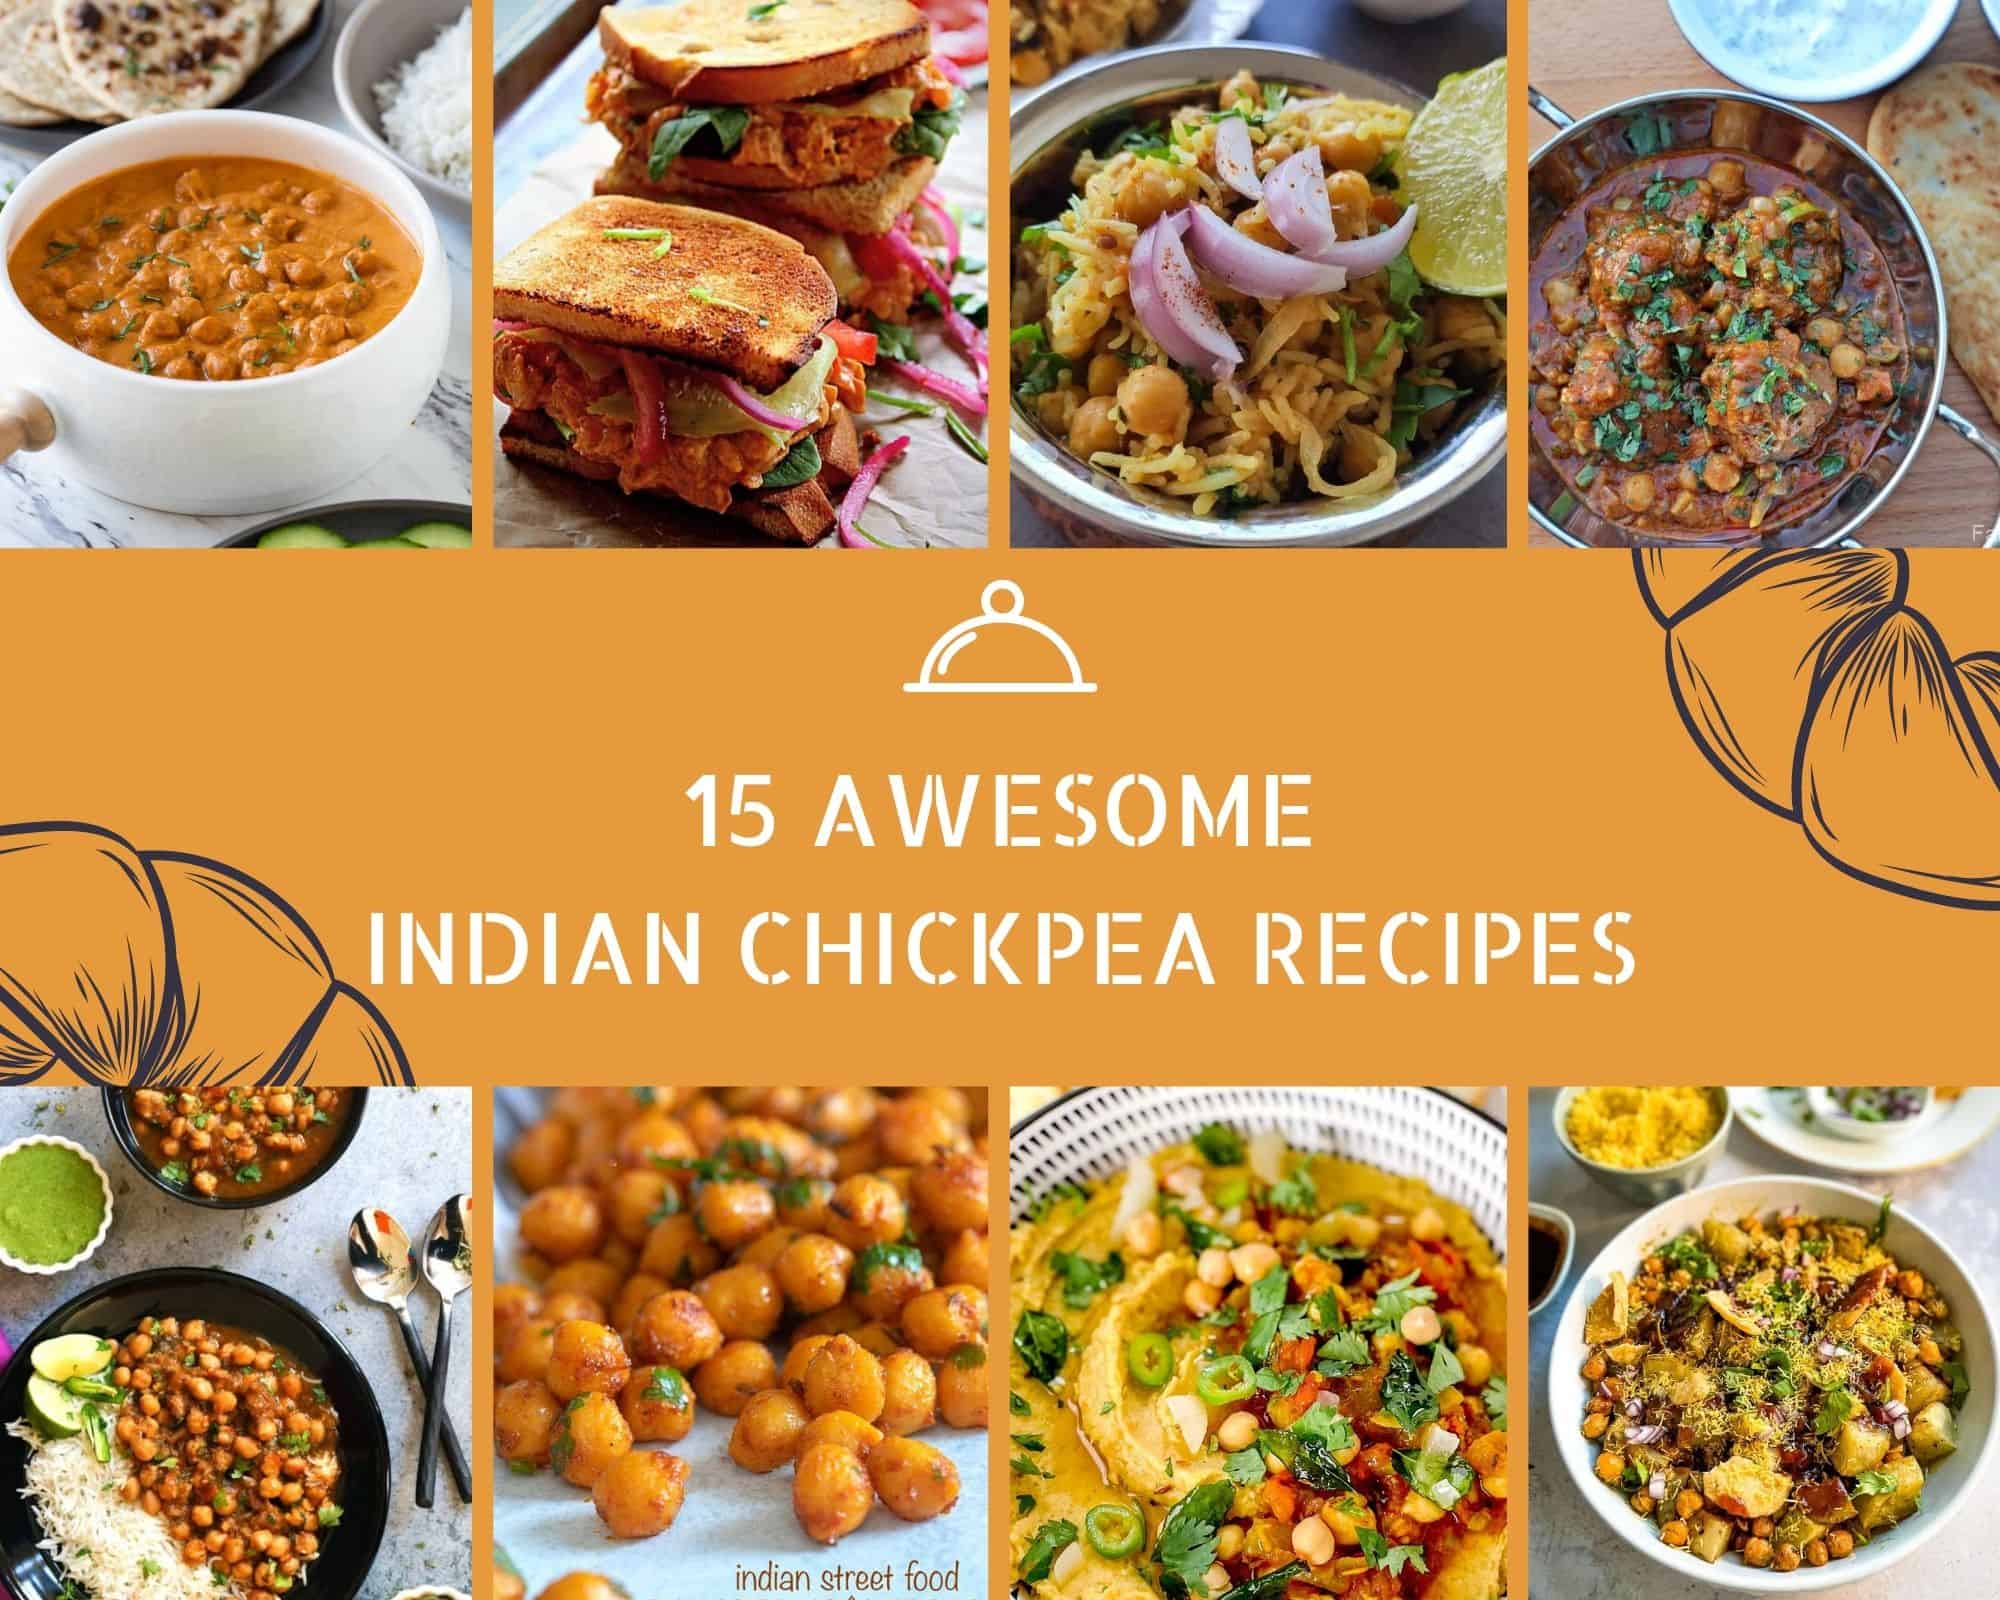 Collage Image of Indian Chickpea Recipes